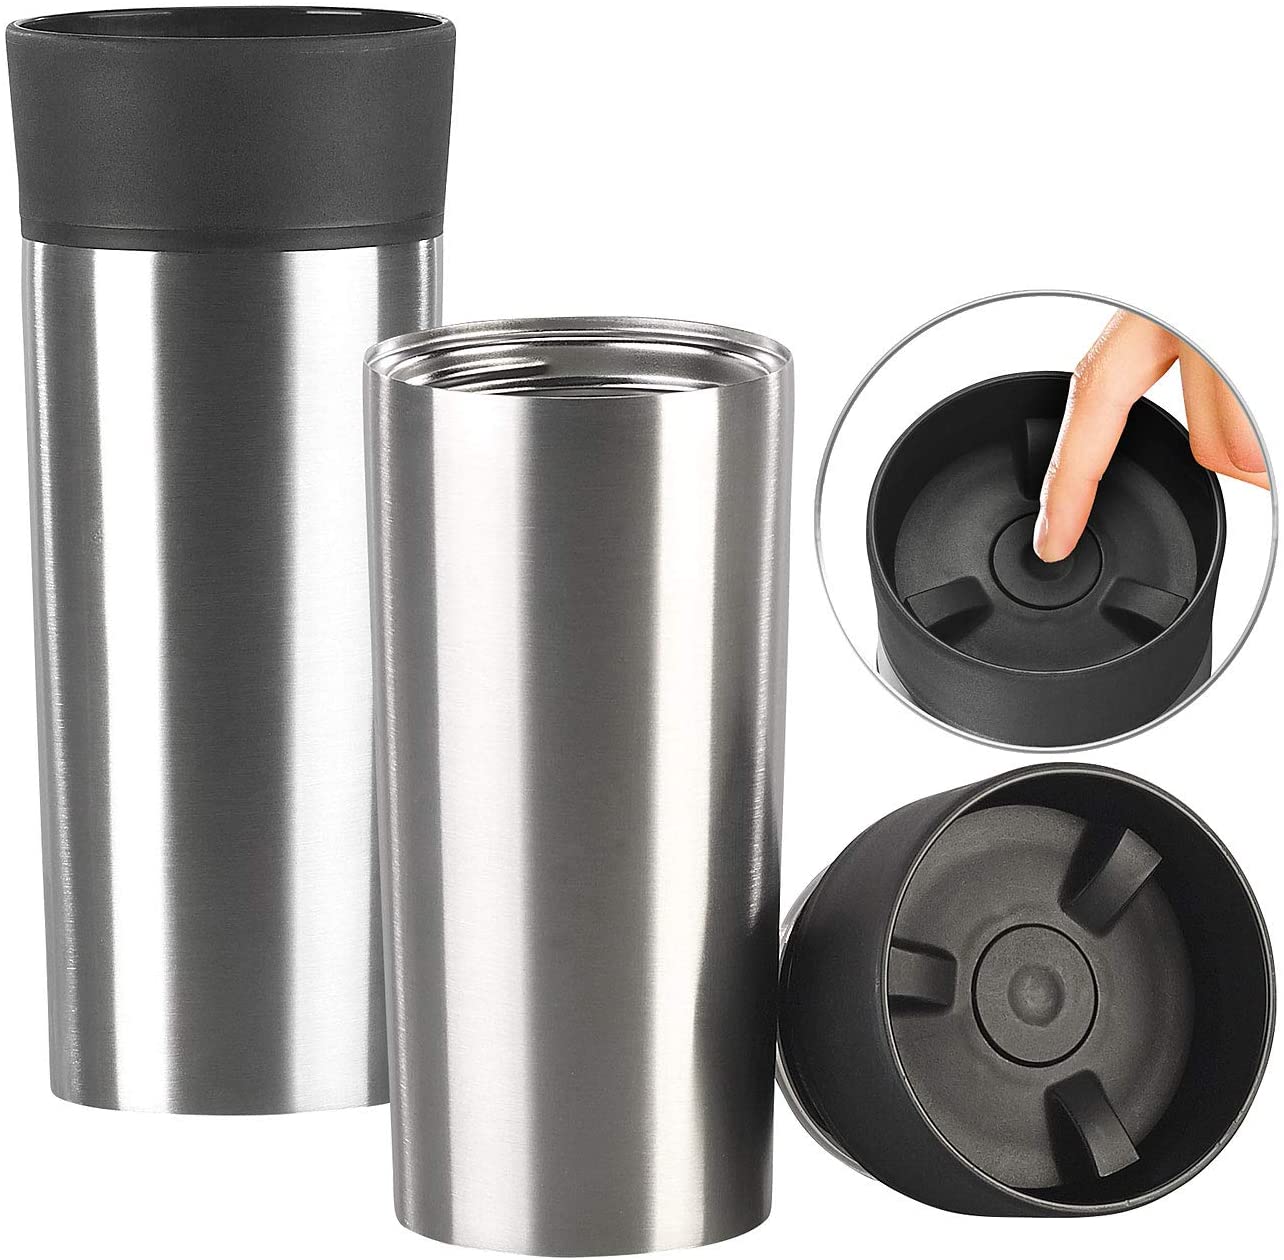 http://honestforwarder.com/uploads/product/Ol5SSZjX64-rosenstein-sohne-thermo-drinking-cups-set-of-2-stainless-steel-insulated-cups-with-quick-press-closure-360-ml-to-go-mug-thermal0.jpg